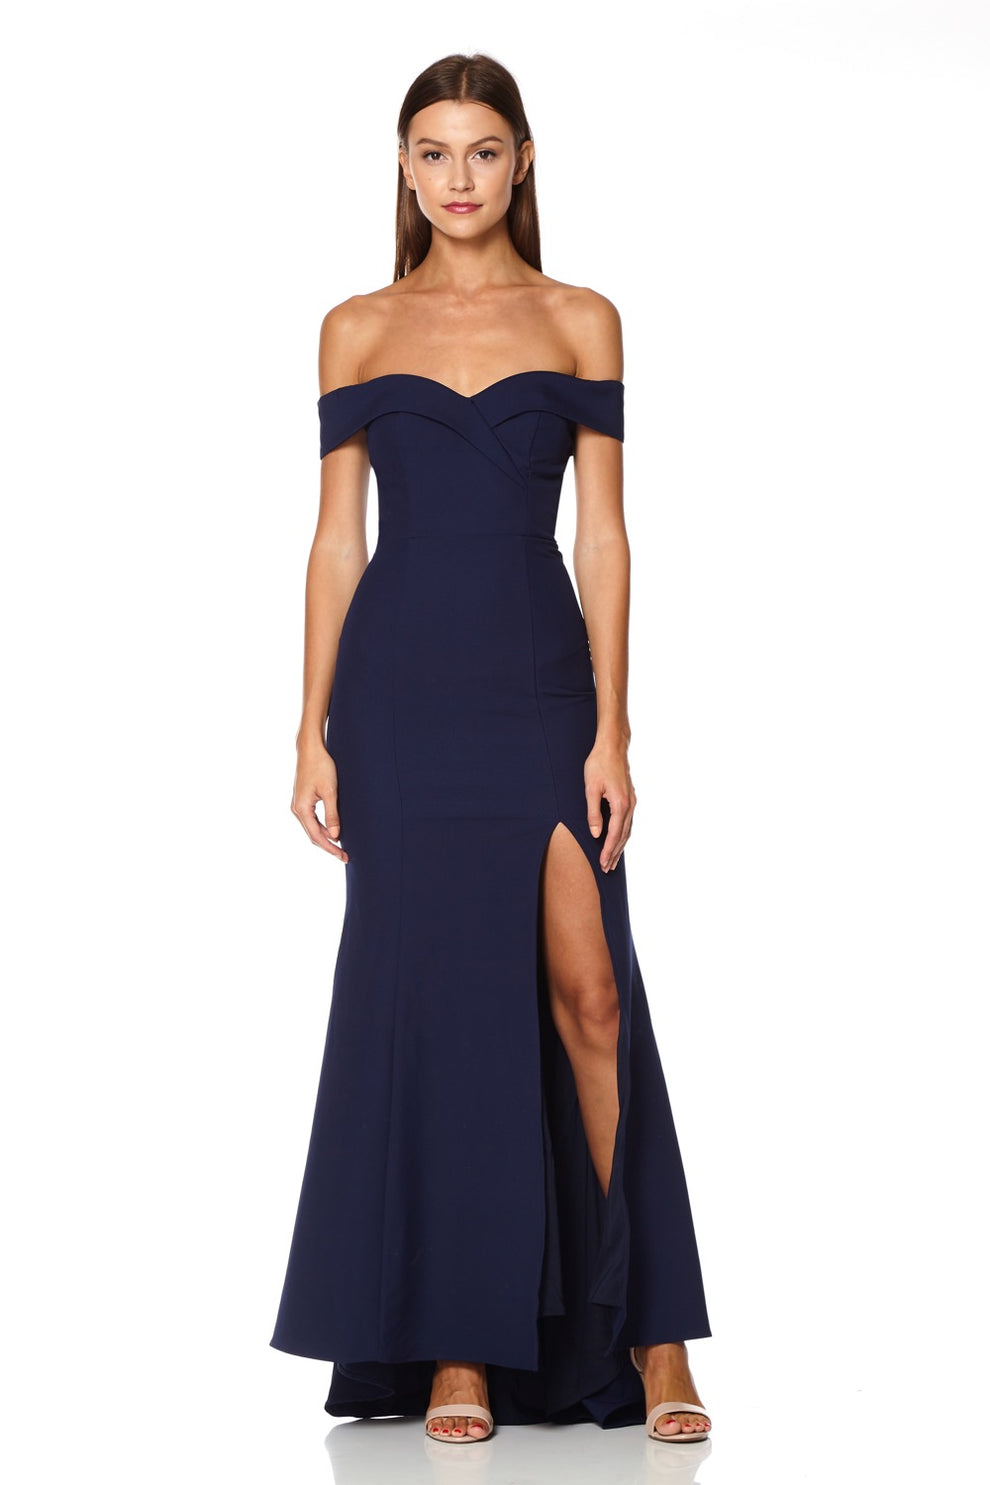 Jarlo's Bella Bardot Maxi Dress With Thigh Split And Train in navy ...